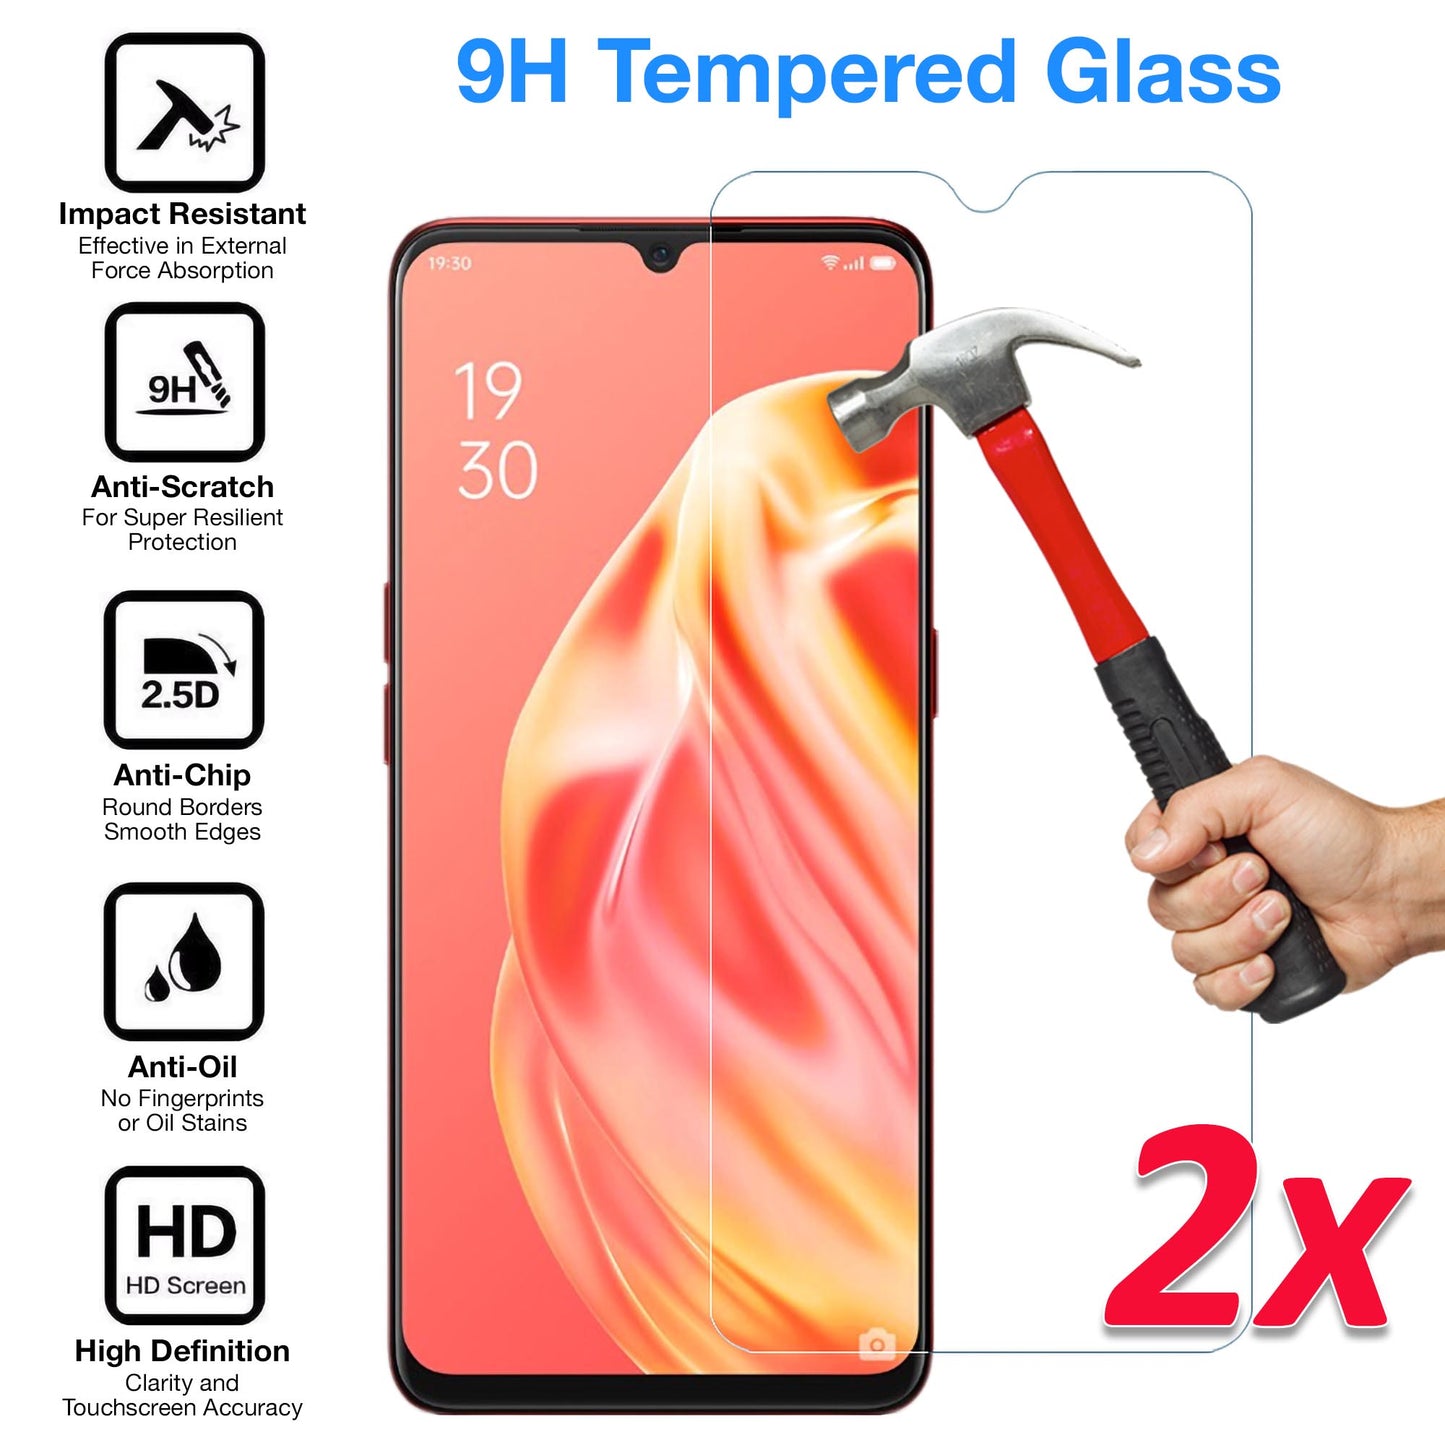 [2 Pack] MEZON Vivo Y3s (2021) Tempered Glass 9H HD Crystal Clear Premium Case Friendly Screen Protector (Vivo Y3s, 9H)